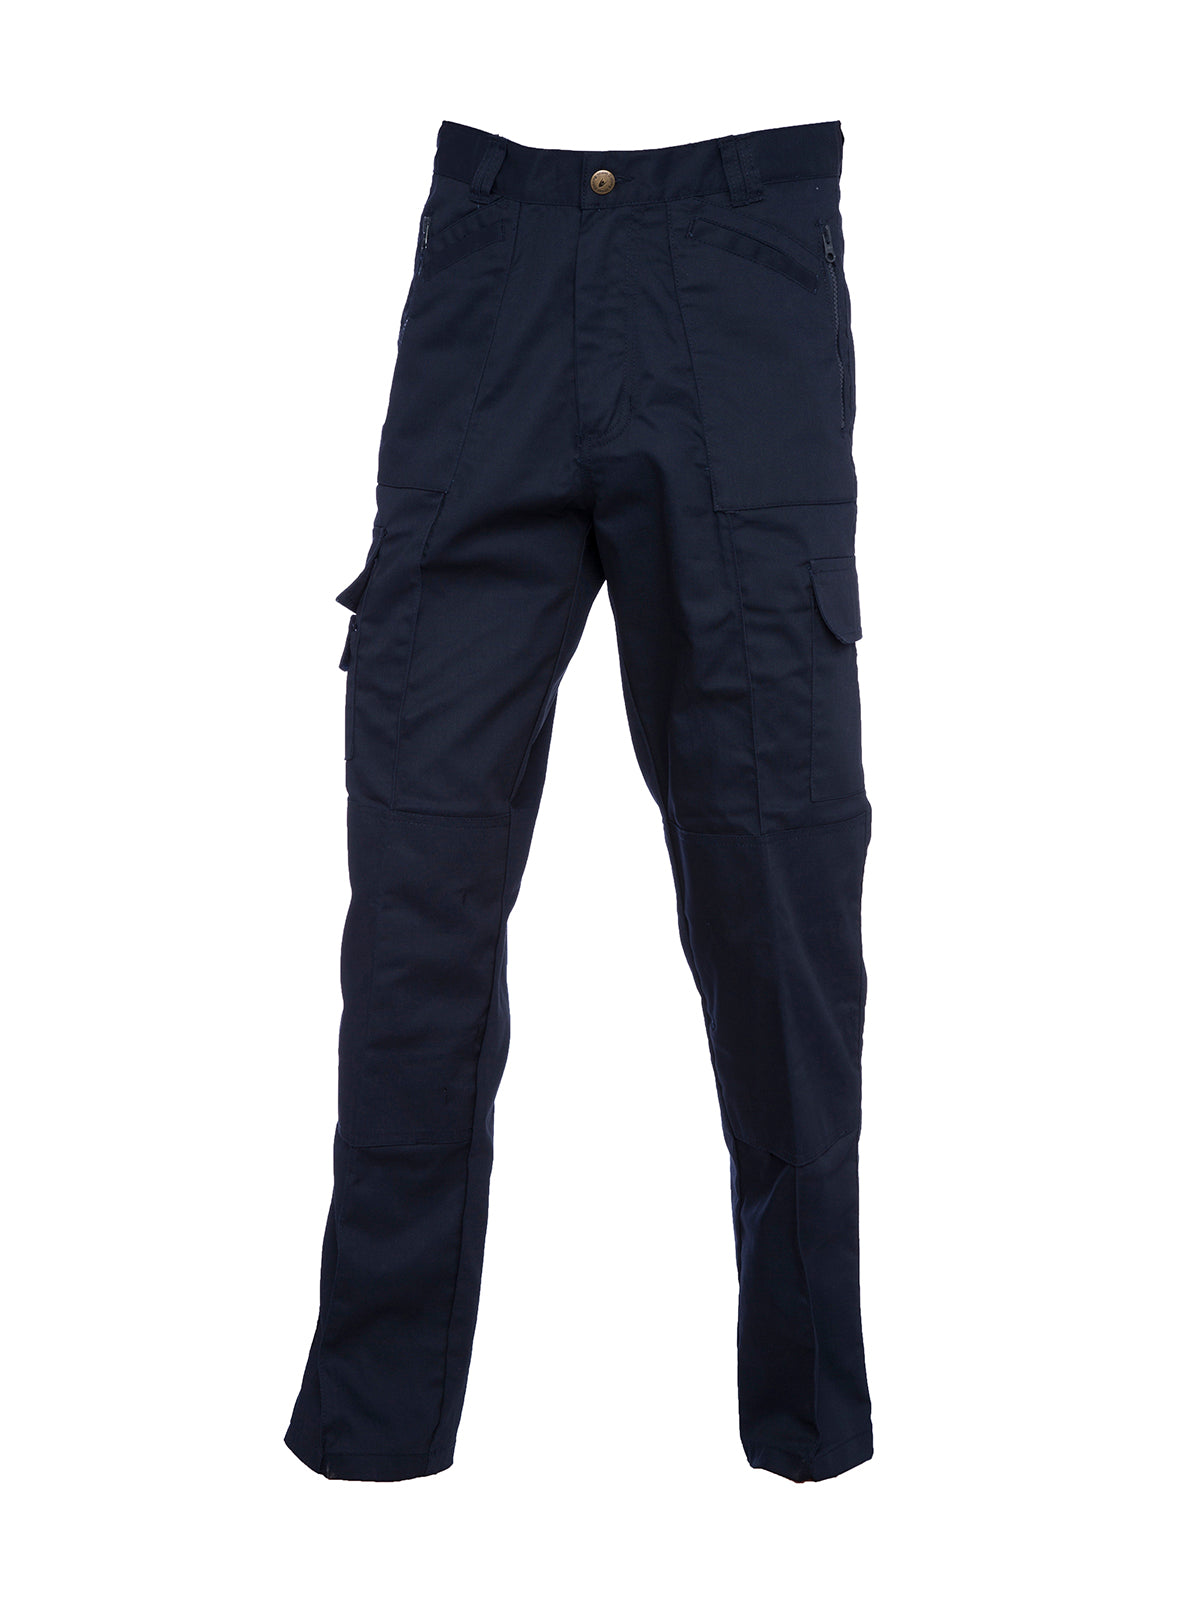 Uneek UC903 Men Action Trousers Knee Pad Pockets Polycotton Navy